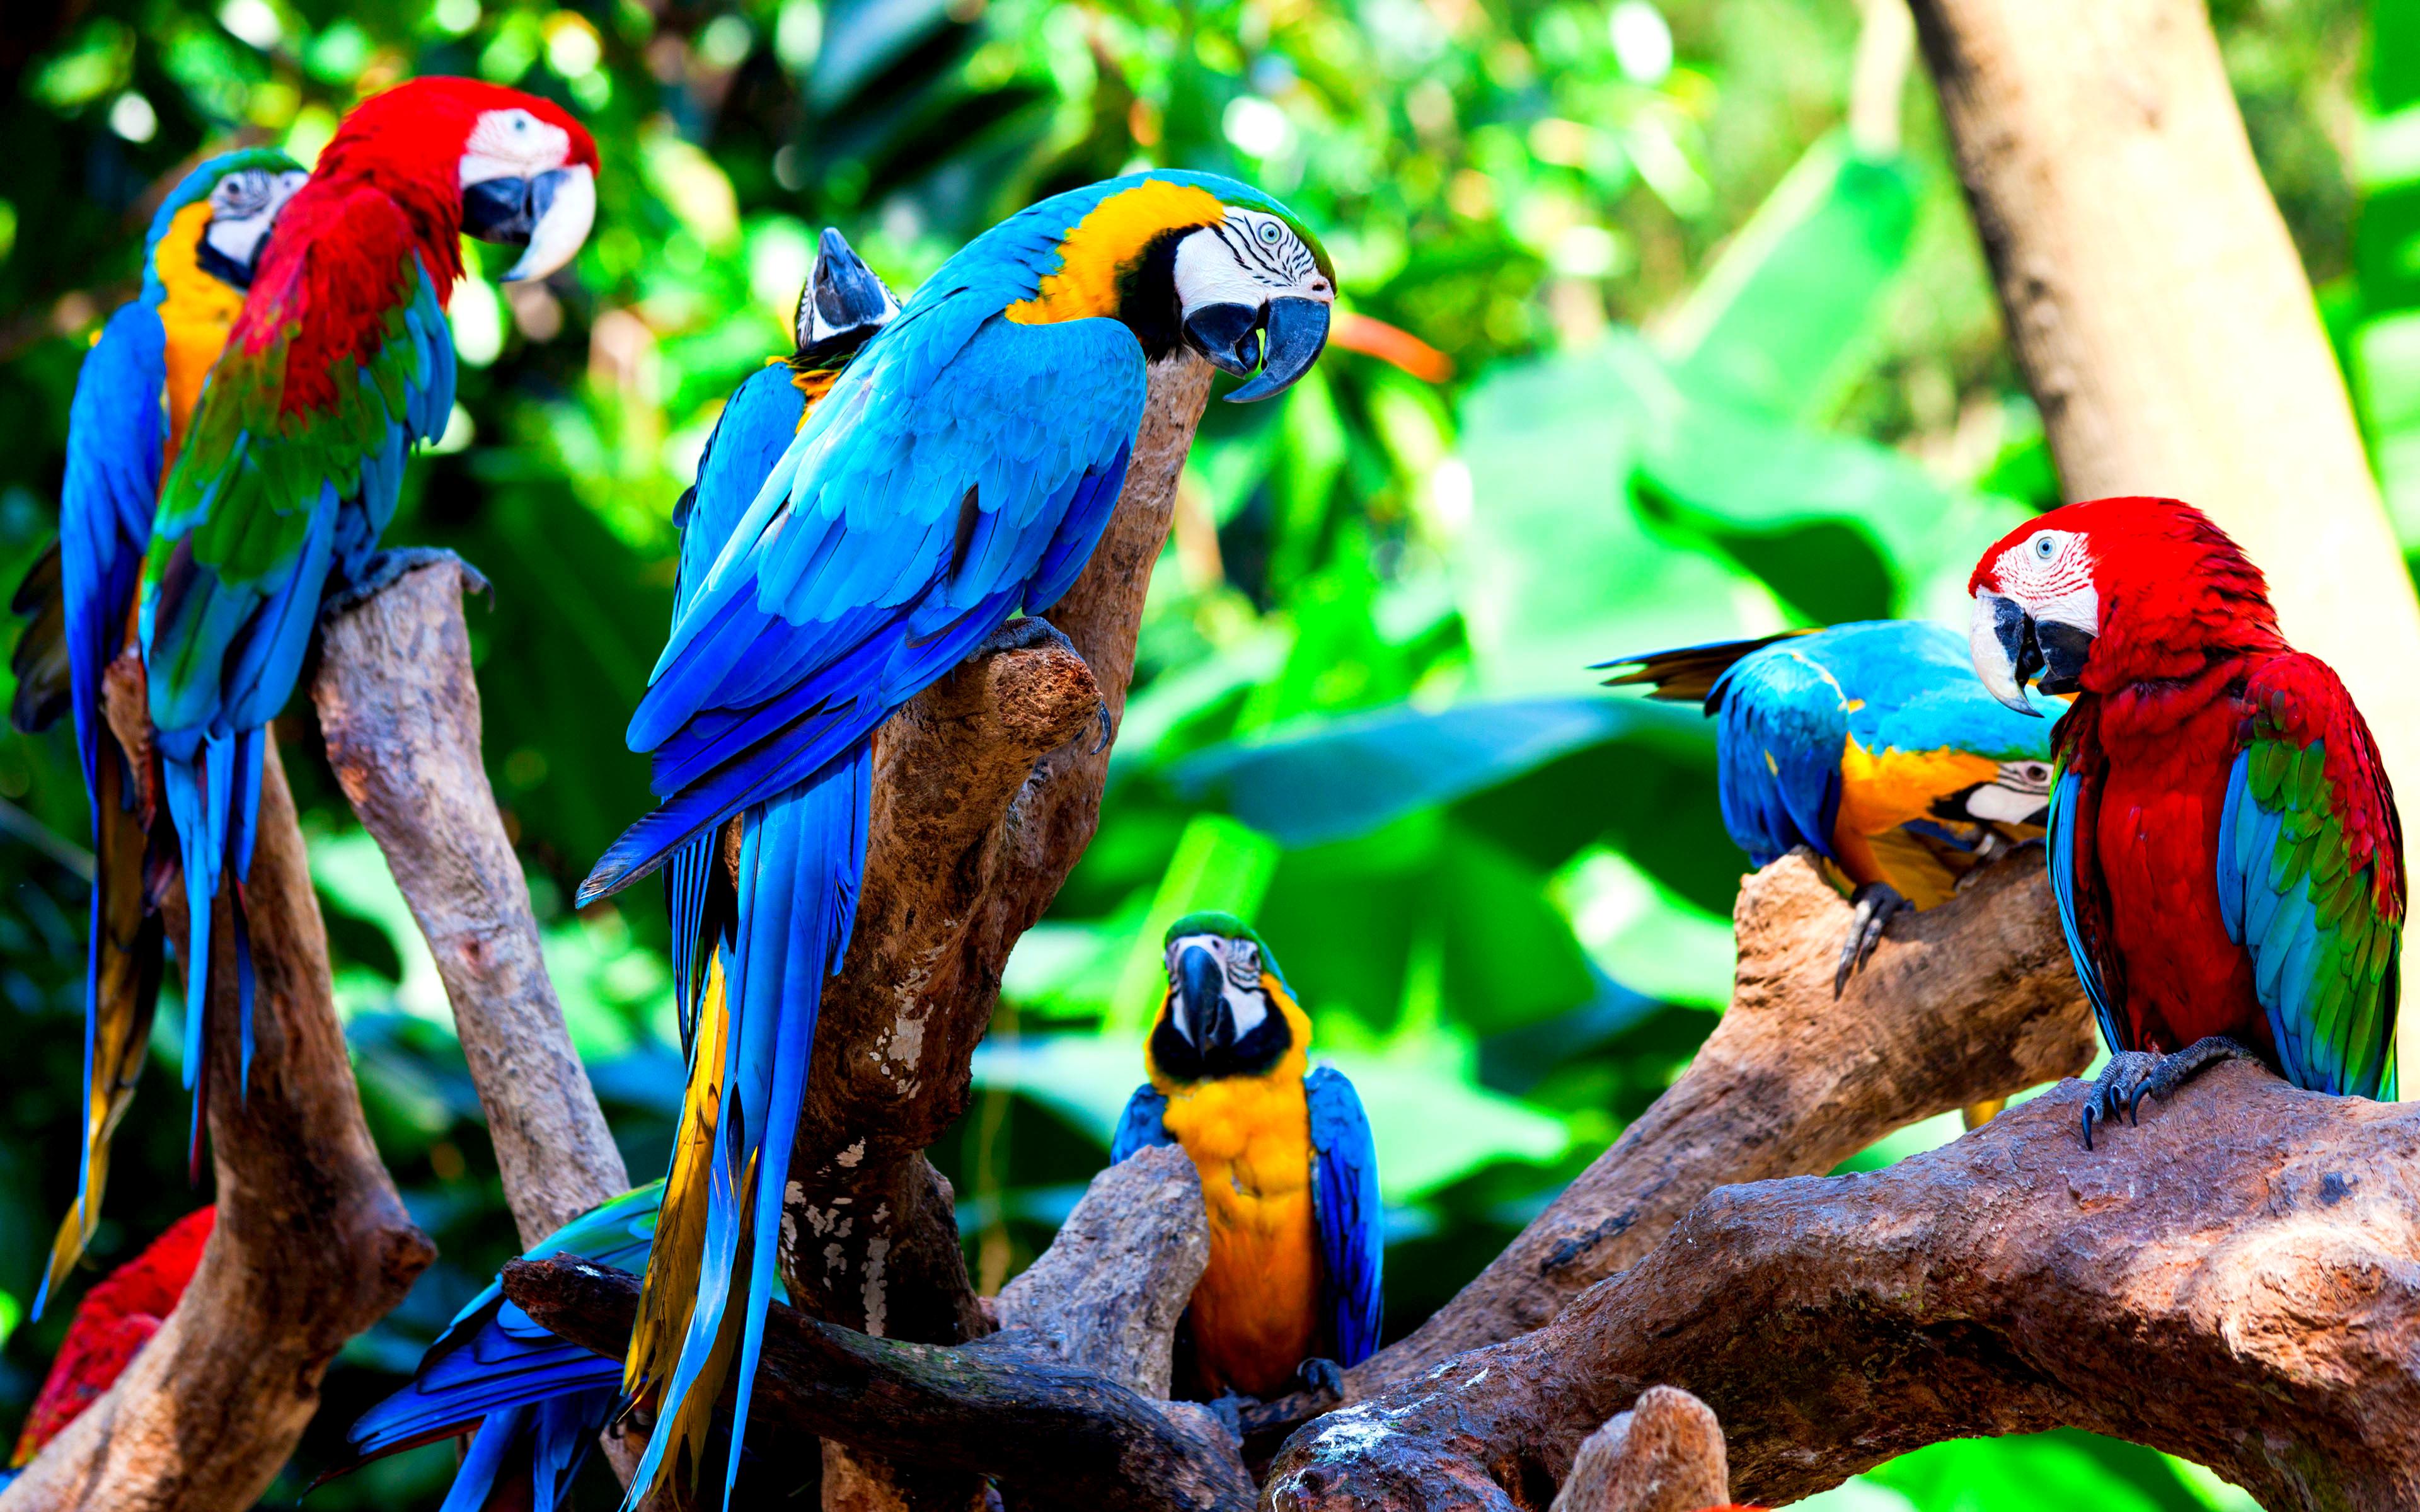 Macaw Wallpapers and Background Images   stmednet